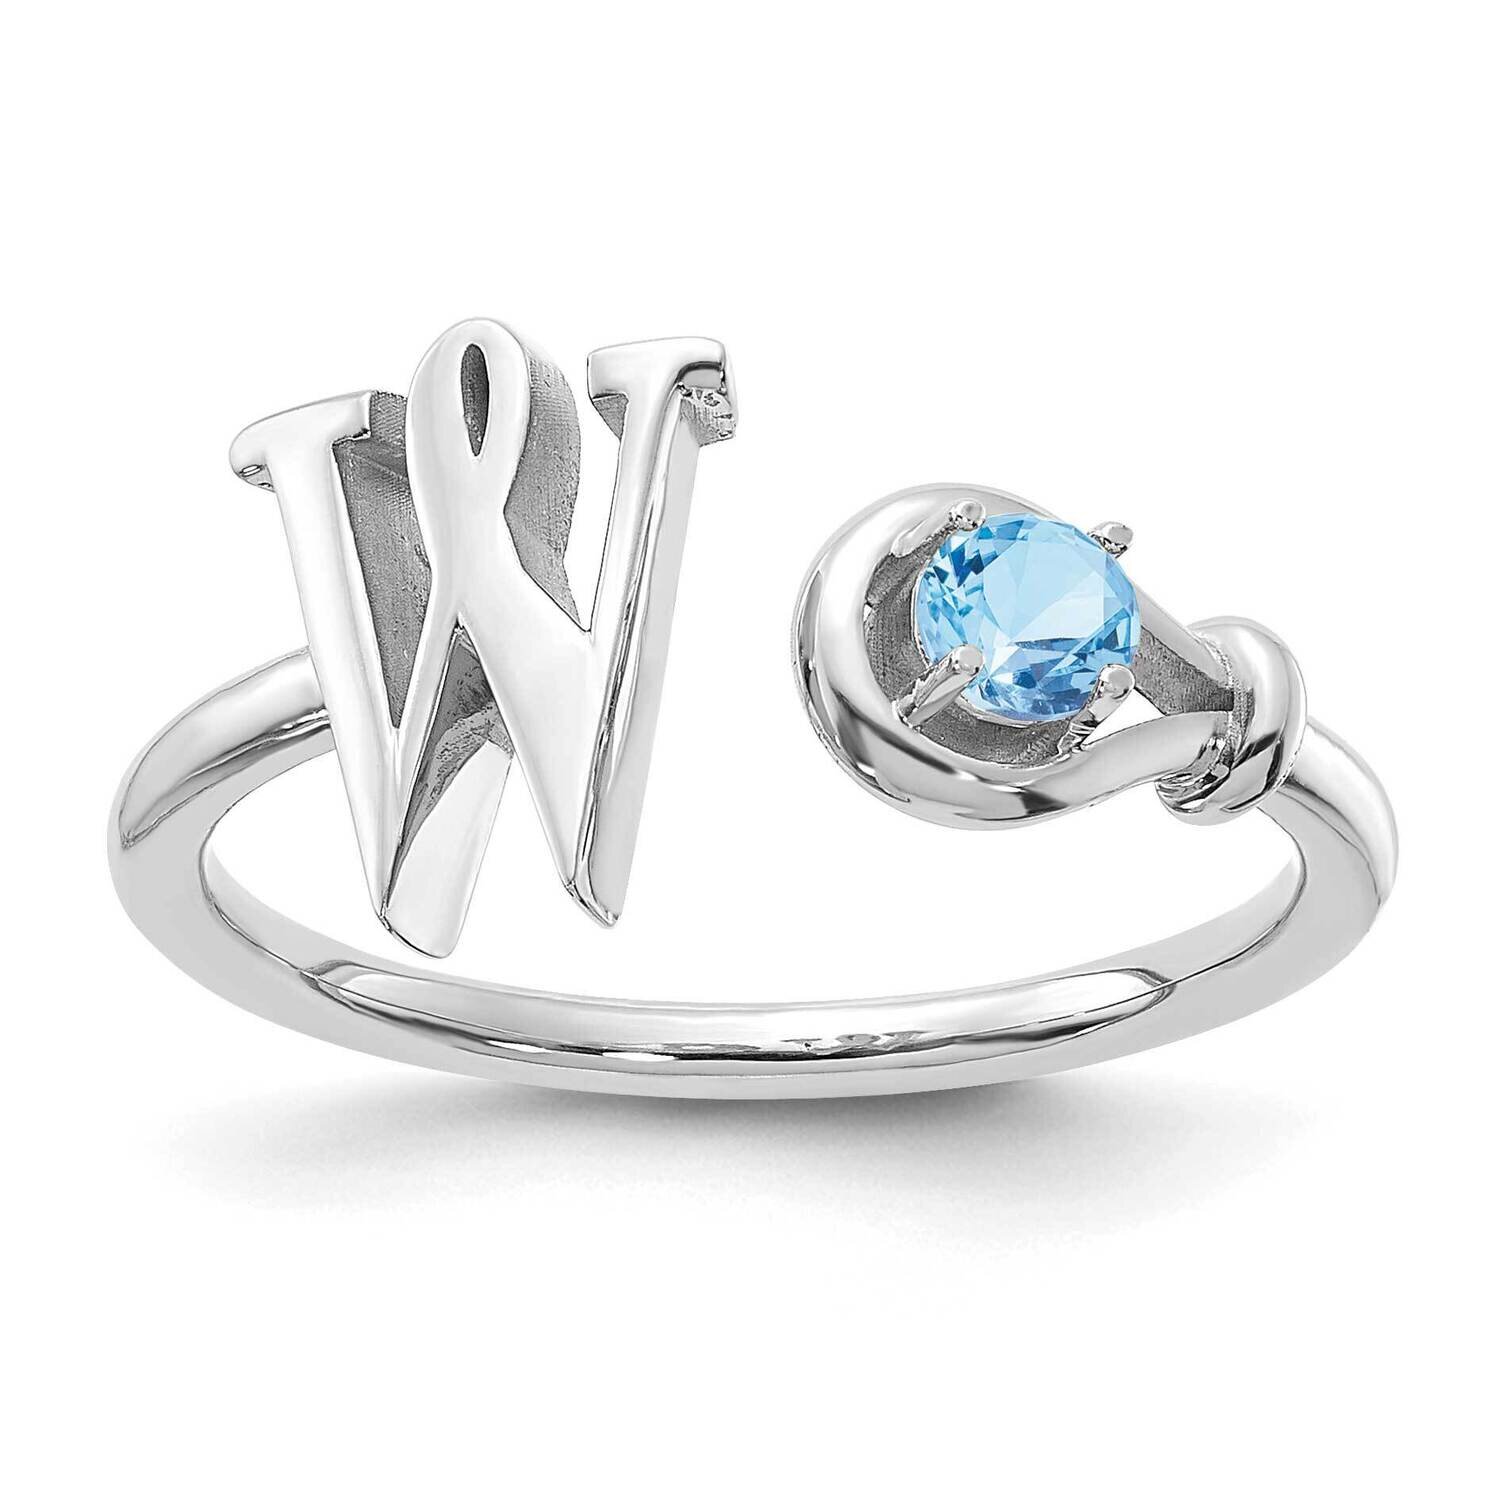 Letter S with Birthstone Ring 14k White Gold XNR81SW